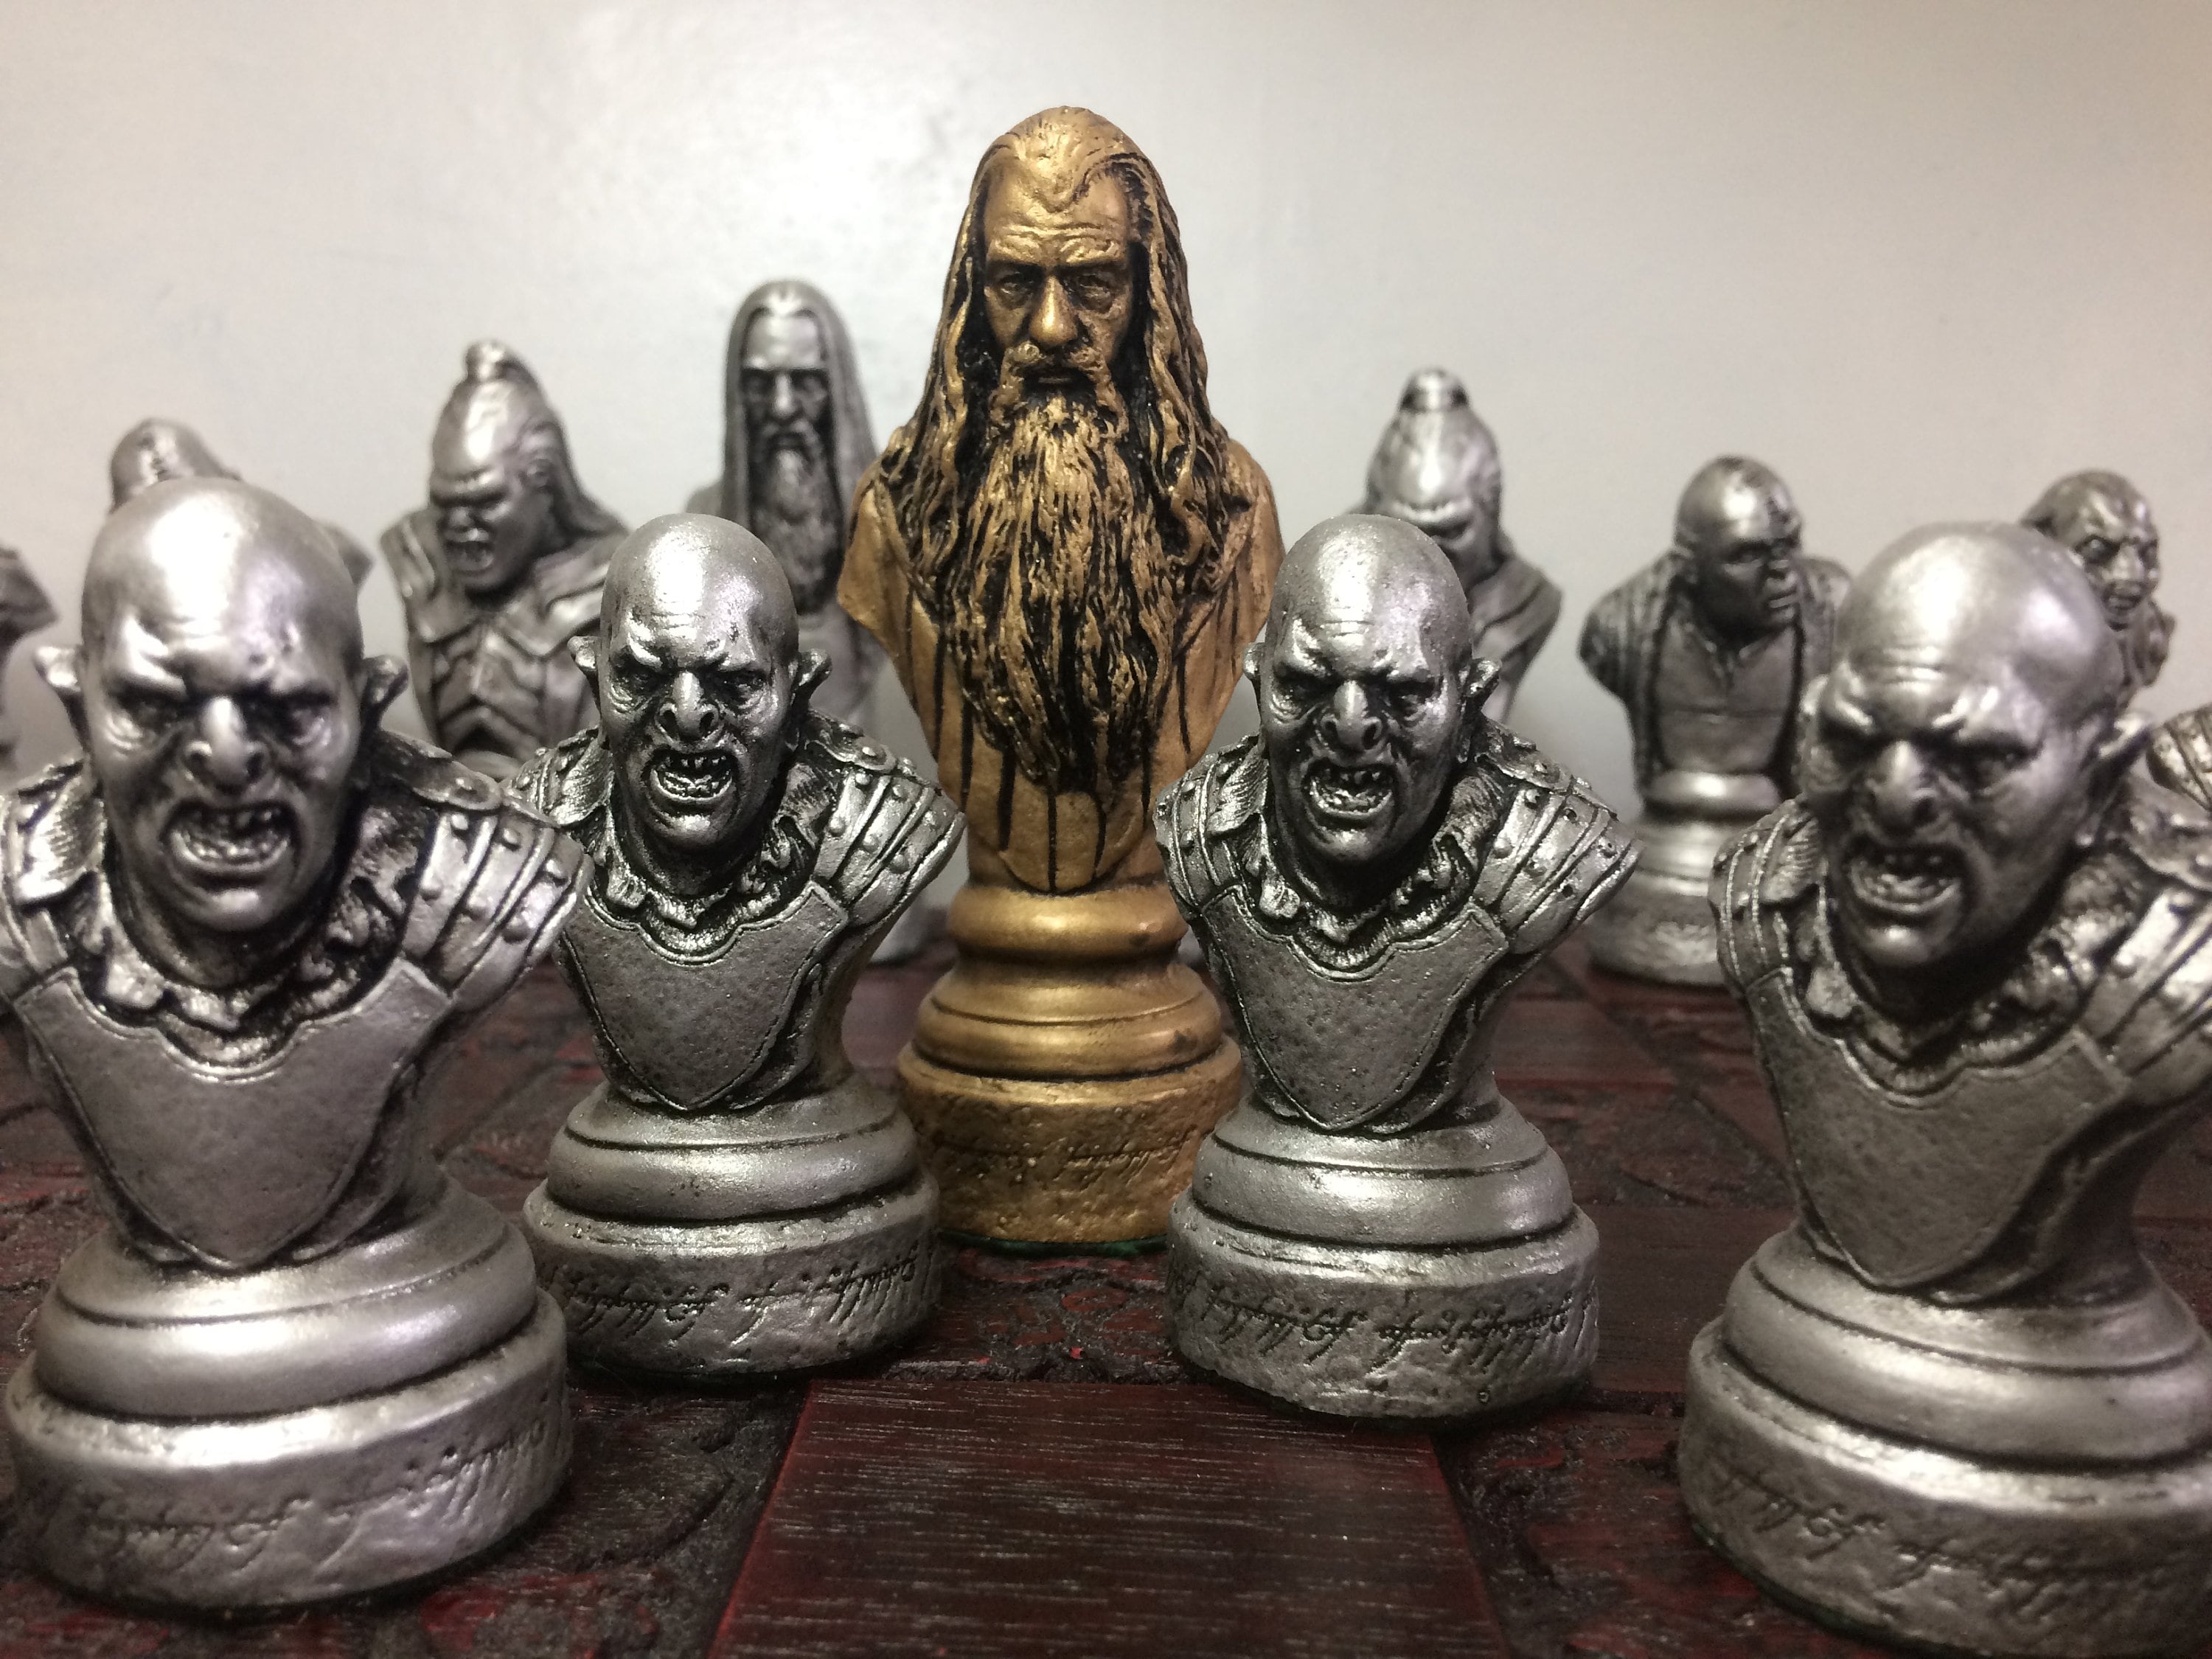 Lord of the Rings chess set - LOTR Chess Set Handmade (Chess pieces only)